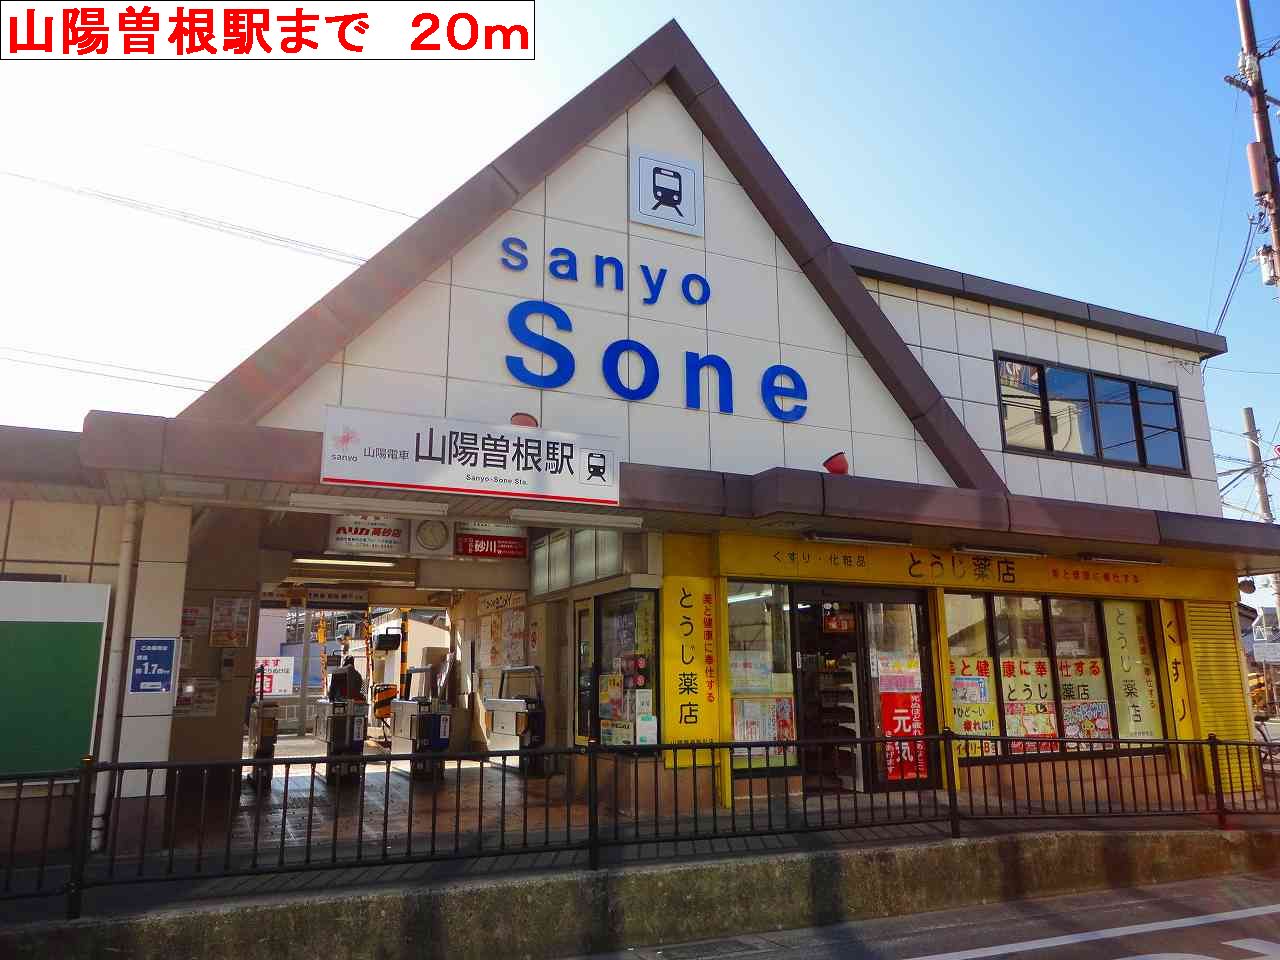 Other. 20m to Sanyo Sone Station (Other)